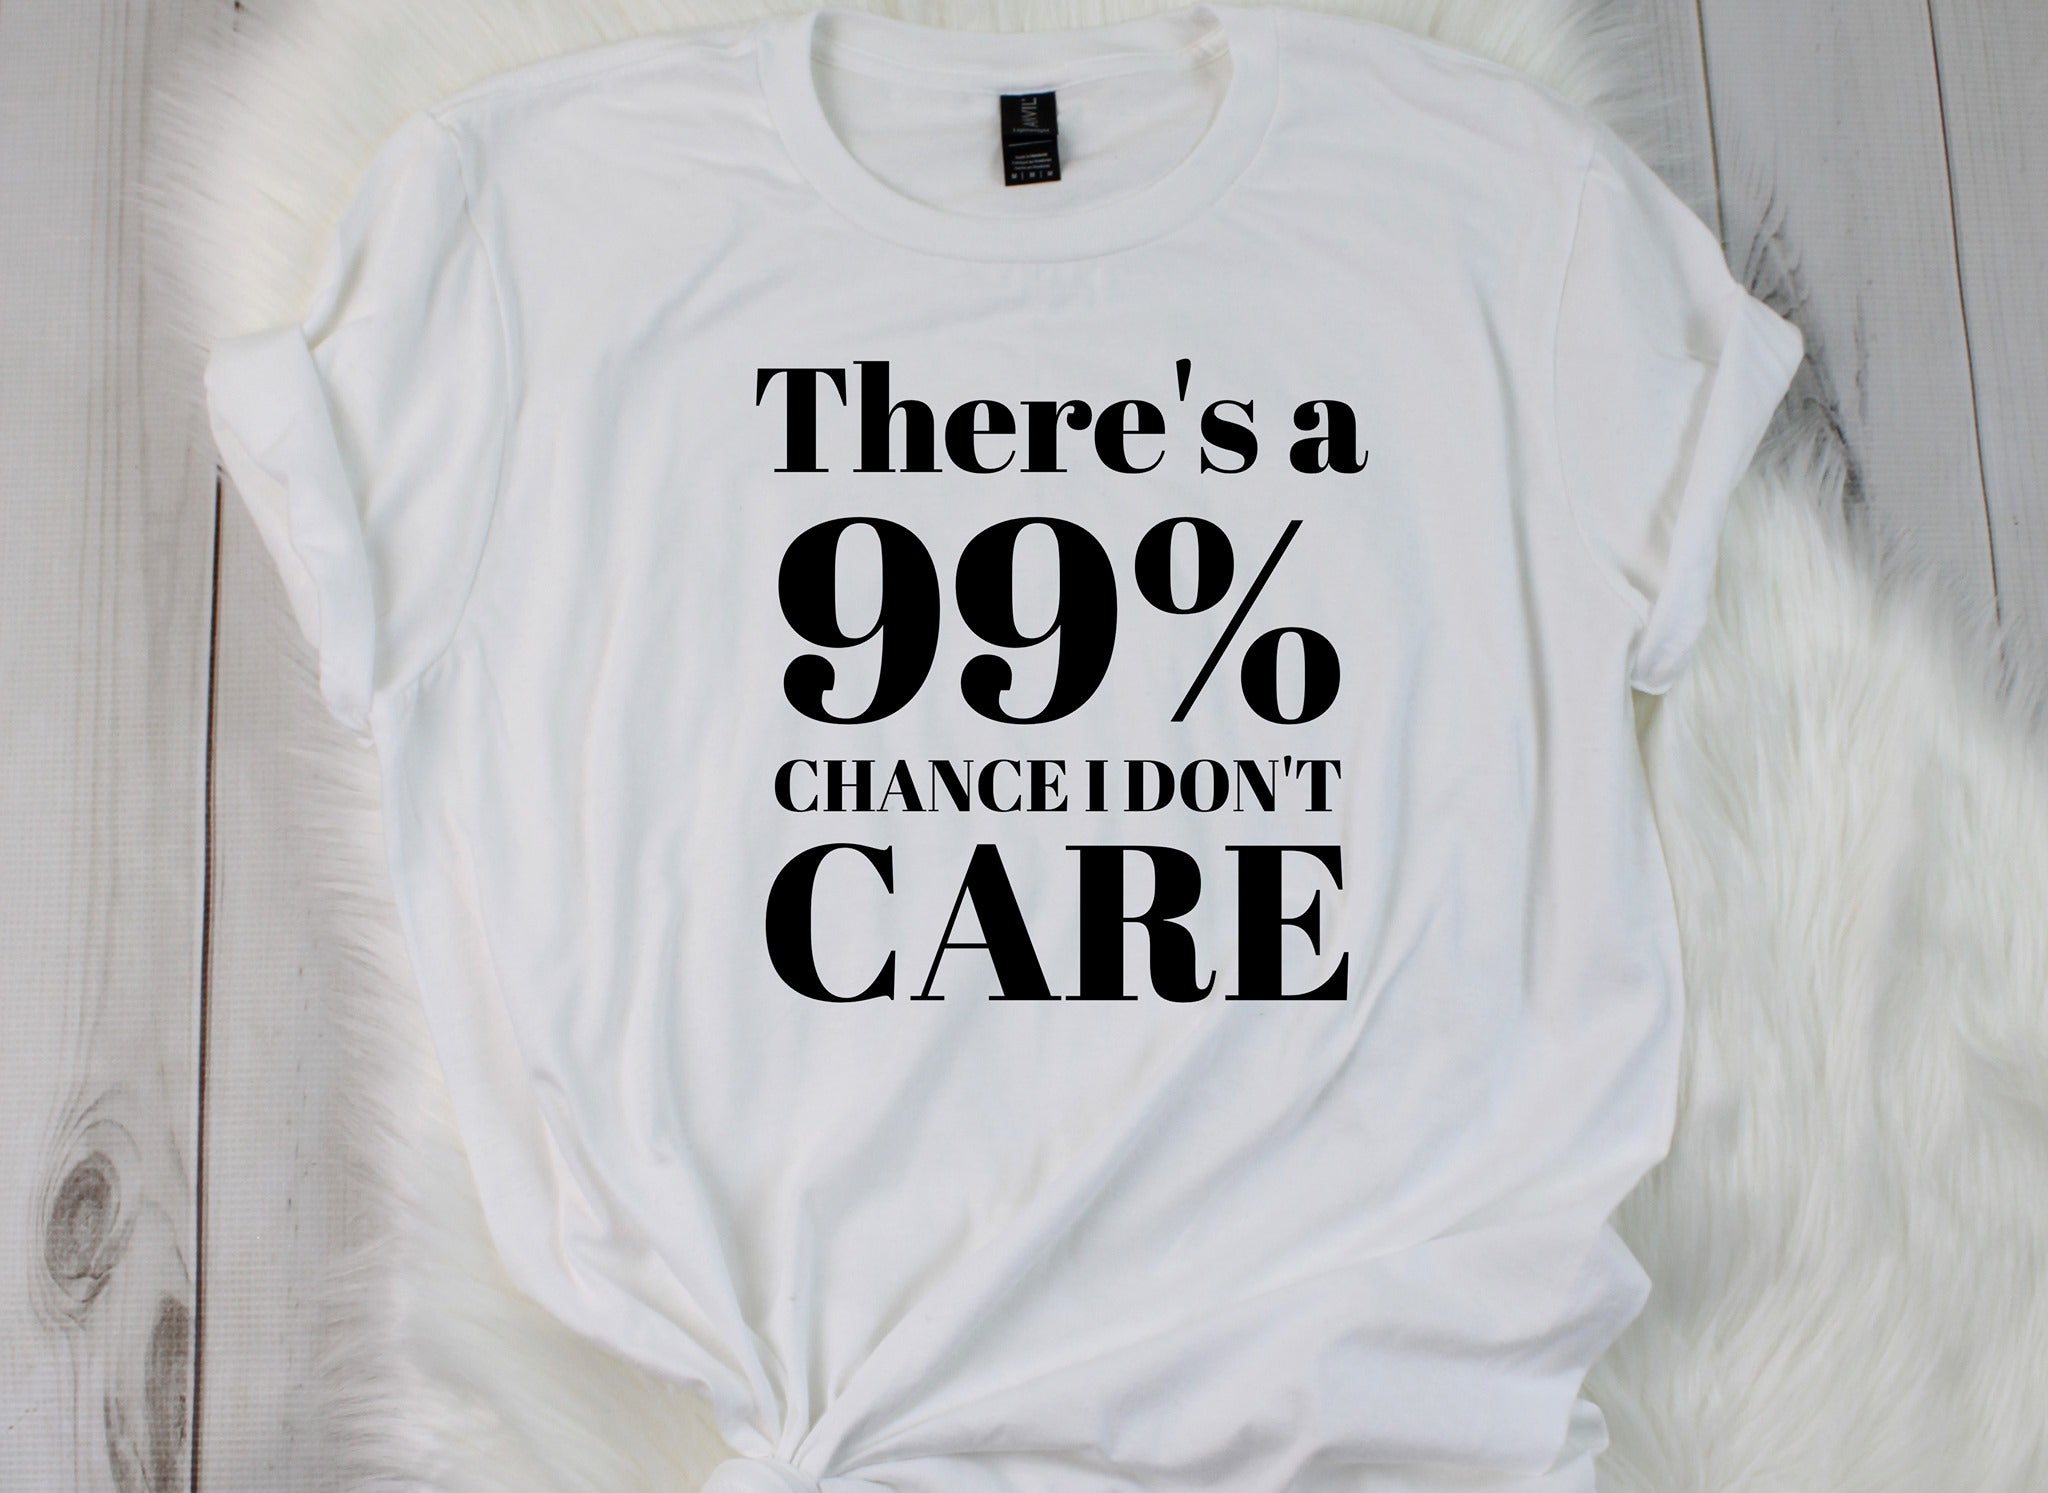 99% chance I don't care